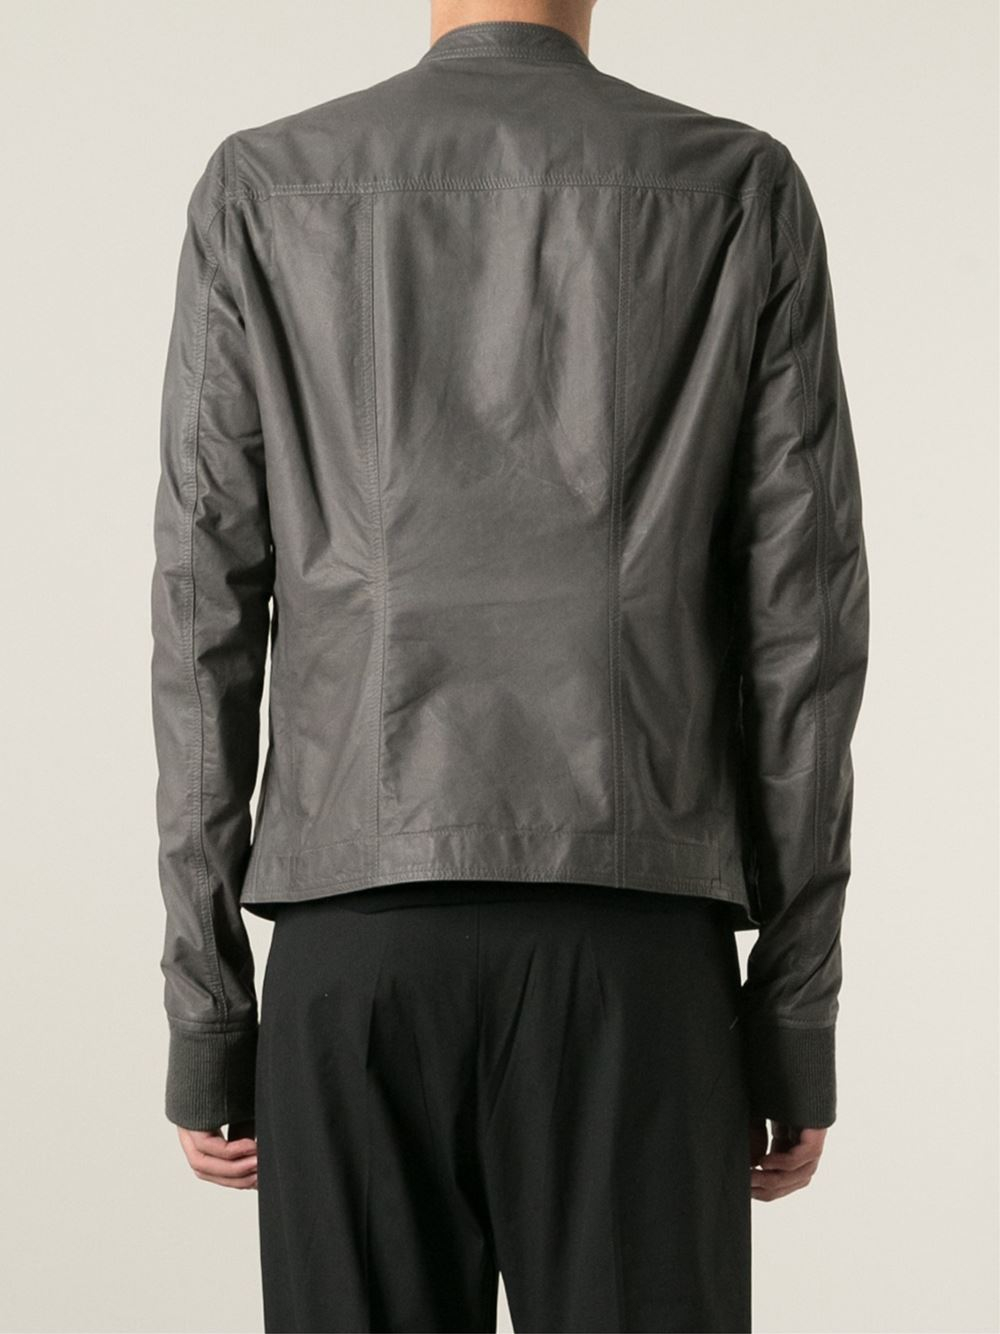 Lyst - Rick Owens Kangaroo Leather Jacket in Gray for Men